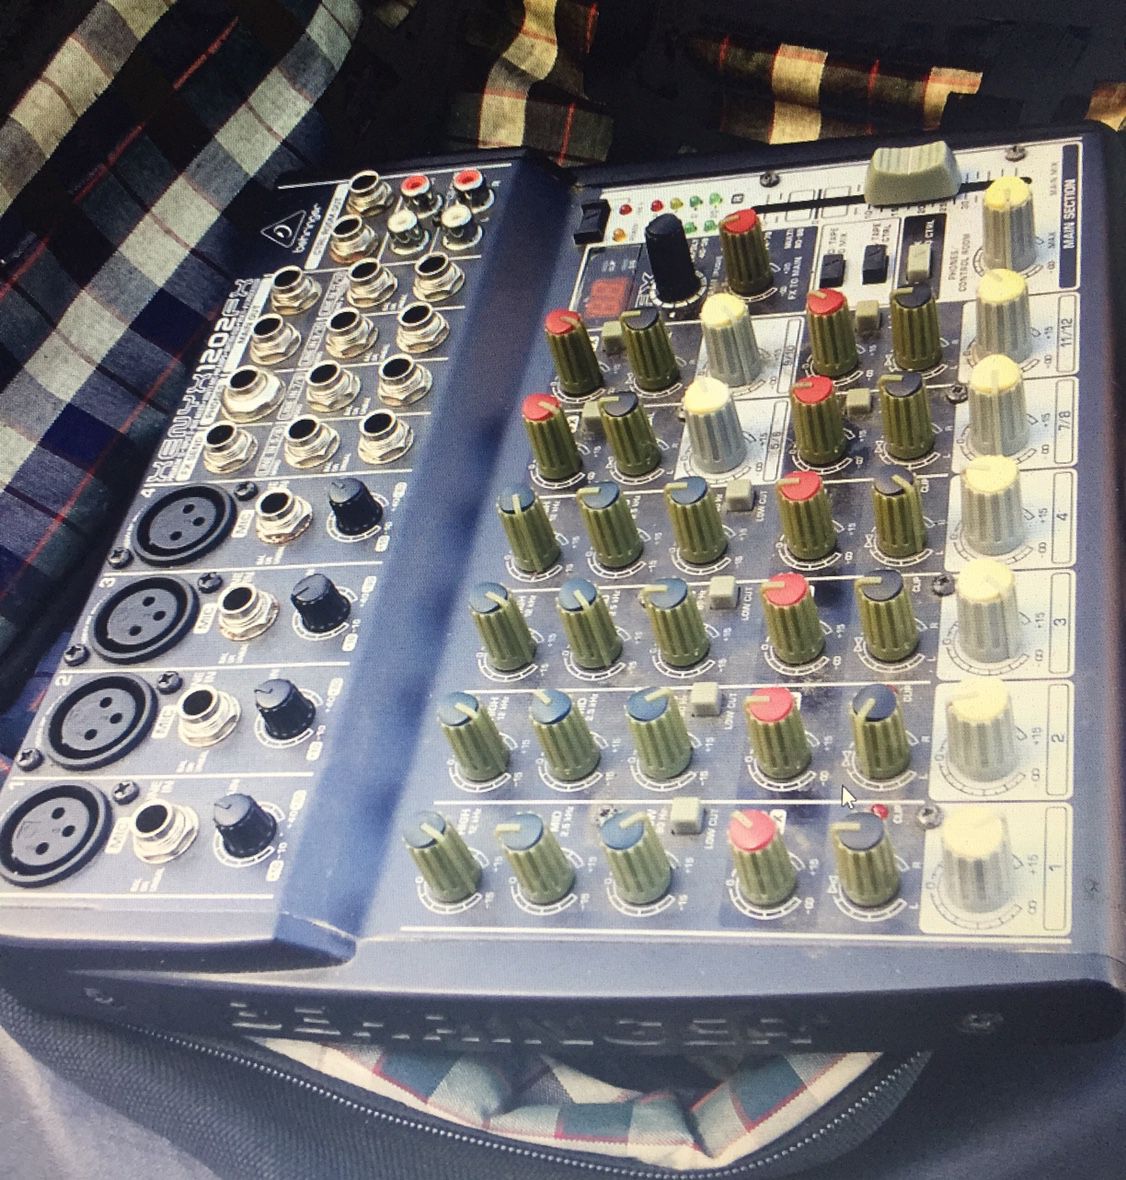 Behringer 12 Channel Mixing Board with Soft Case $70